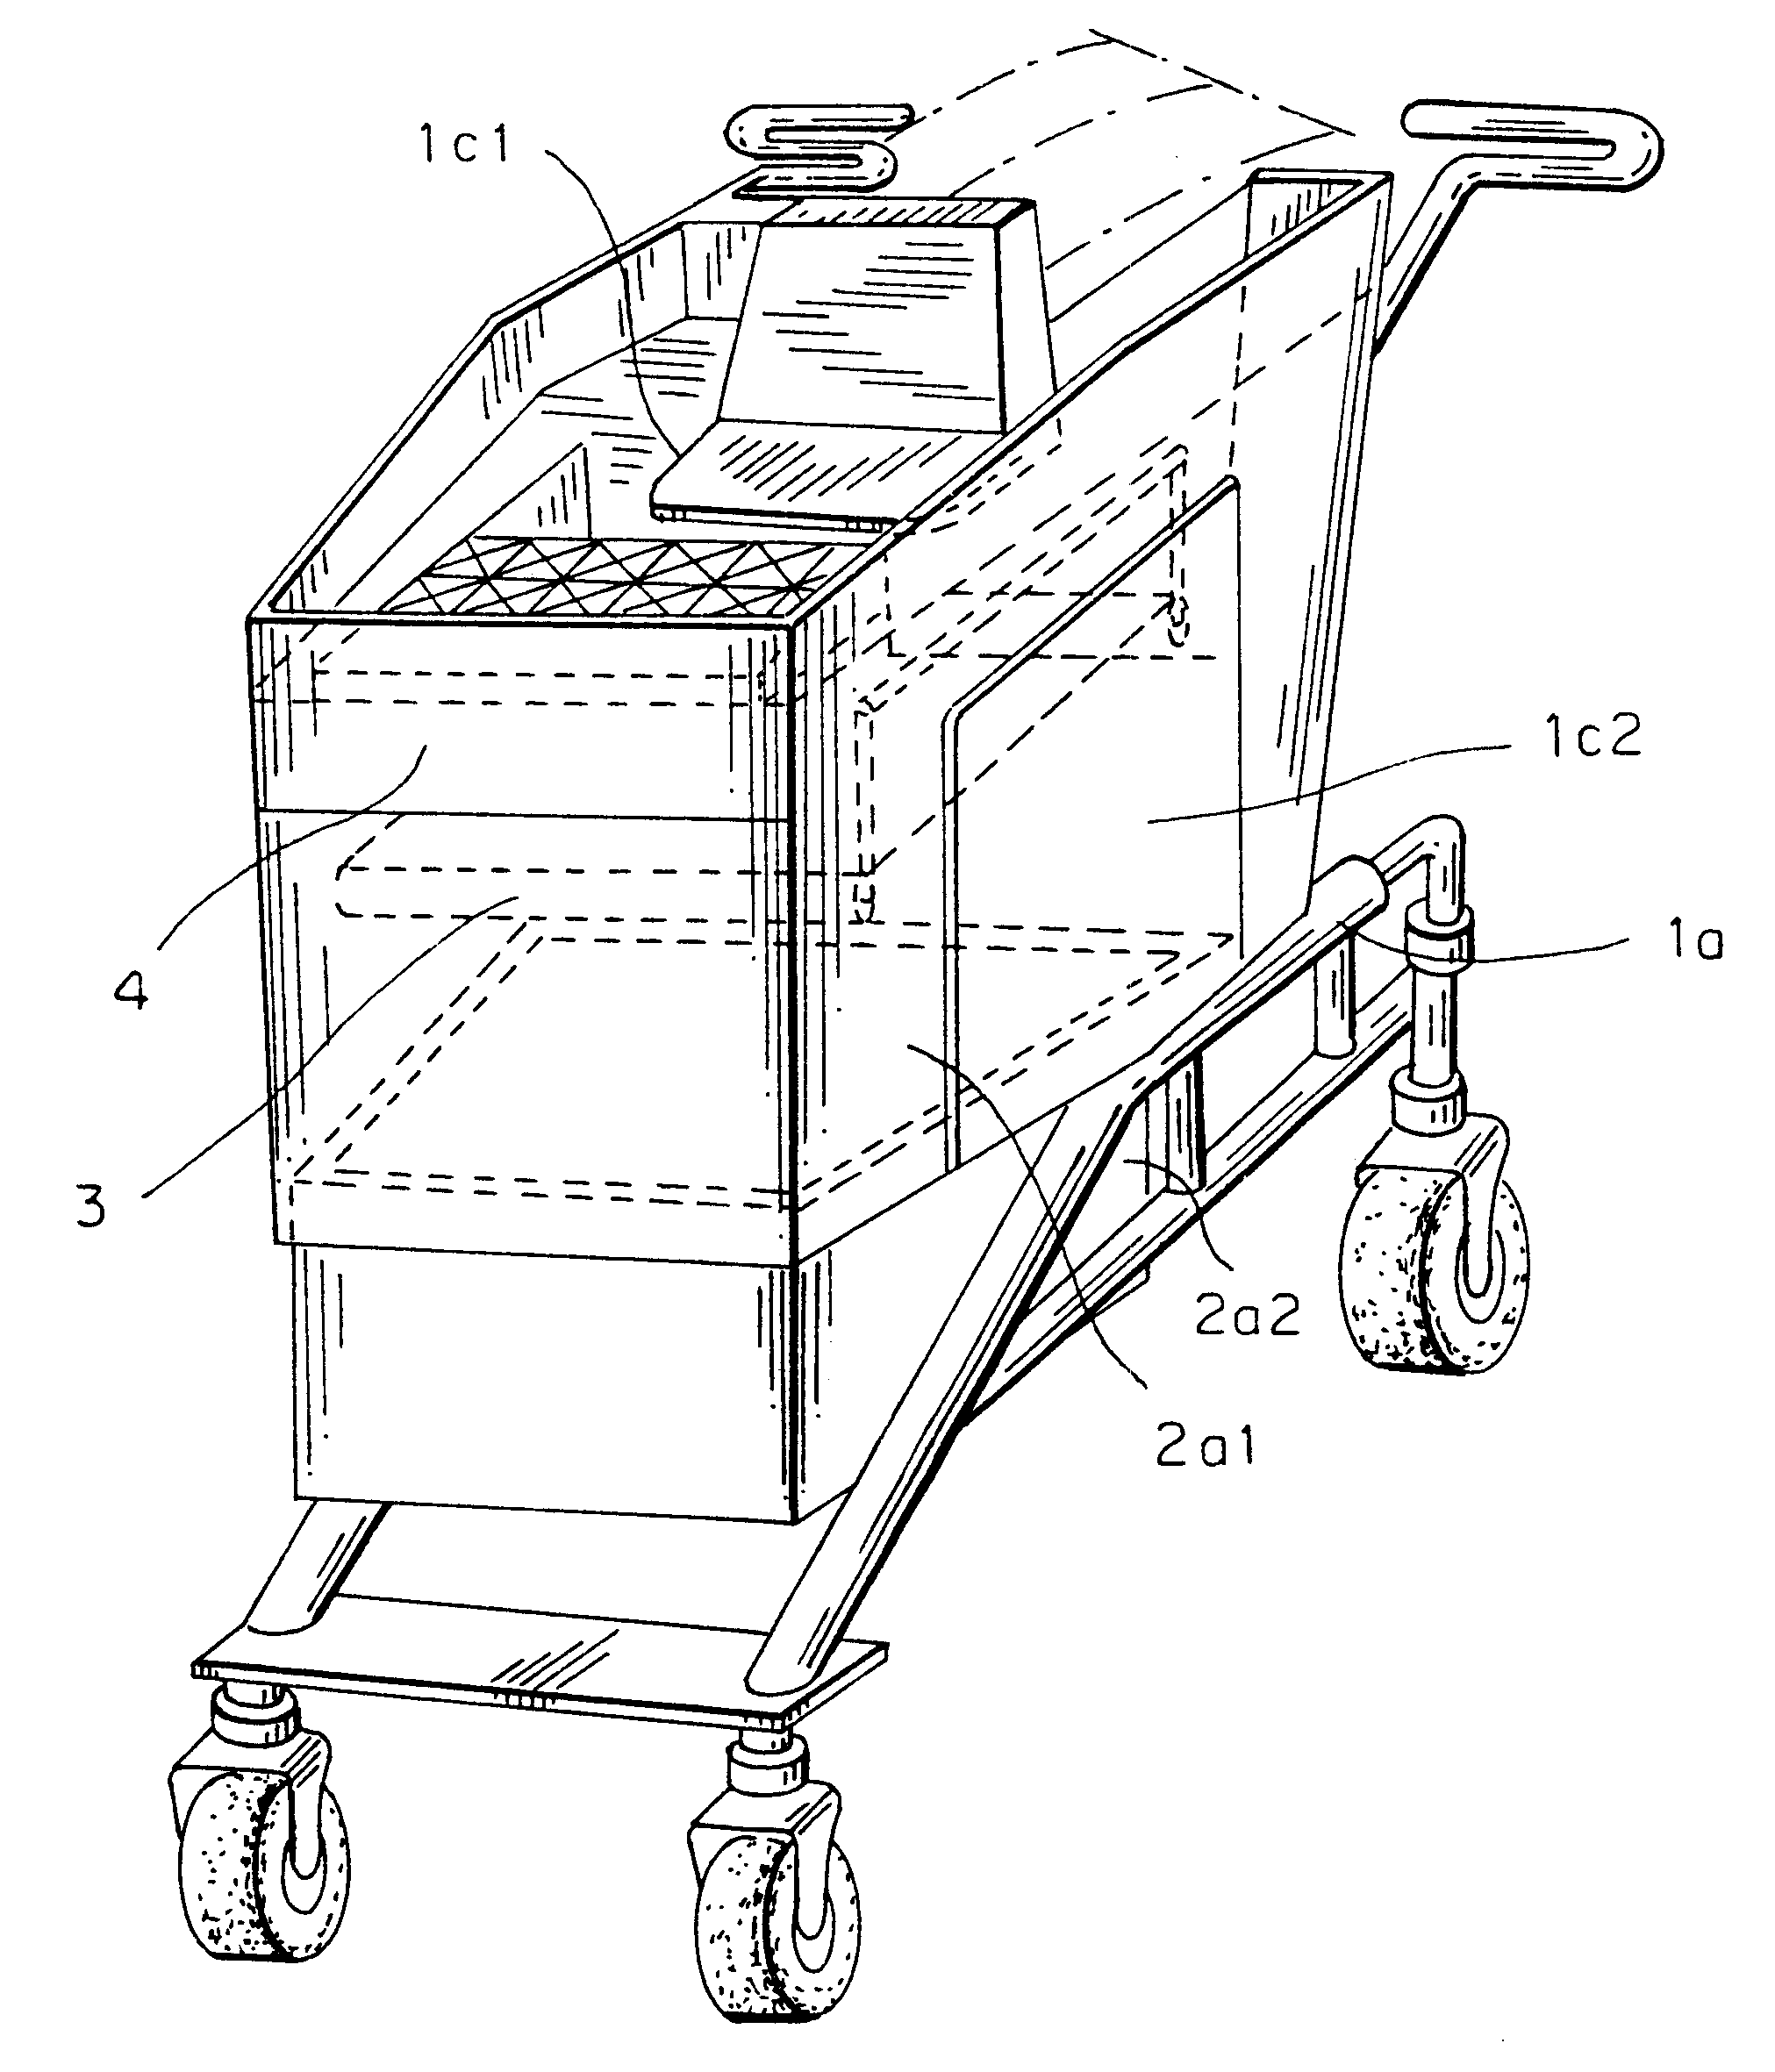 Computerized shopping cart with storage and distribution system, for supermarket use